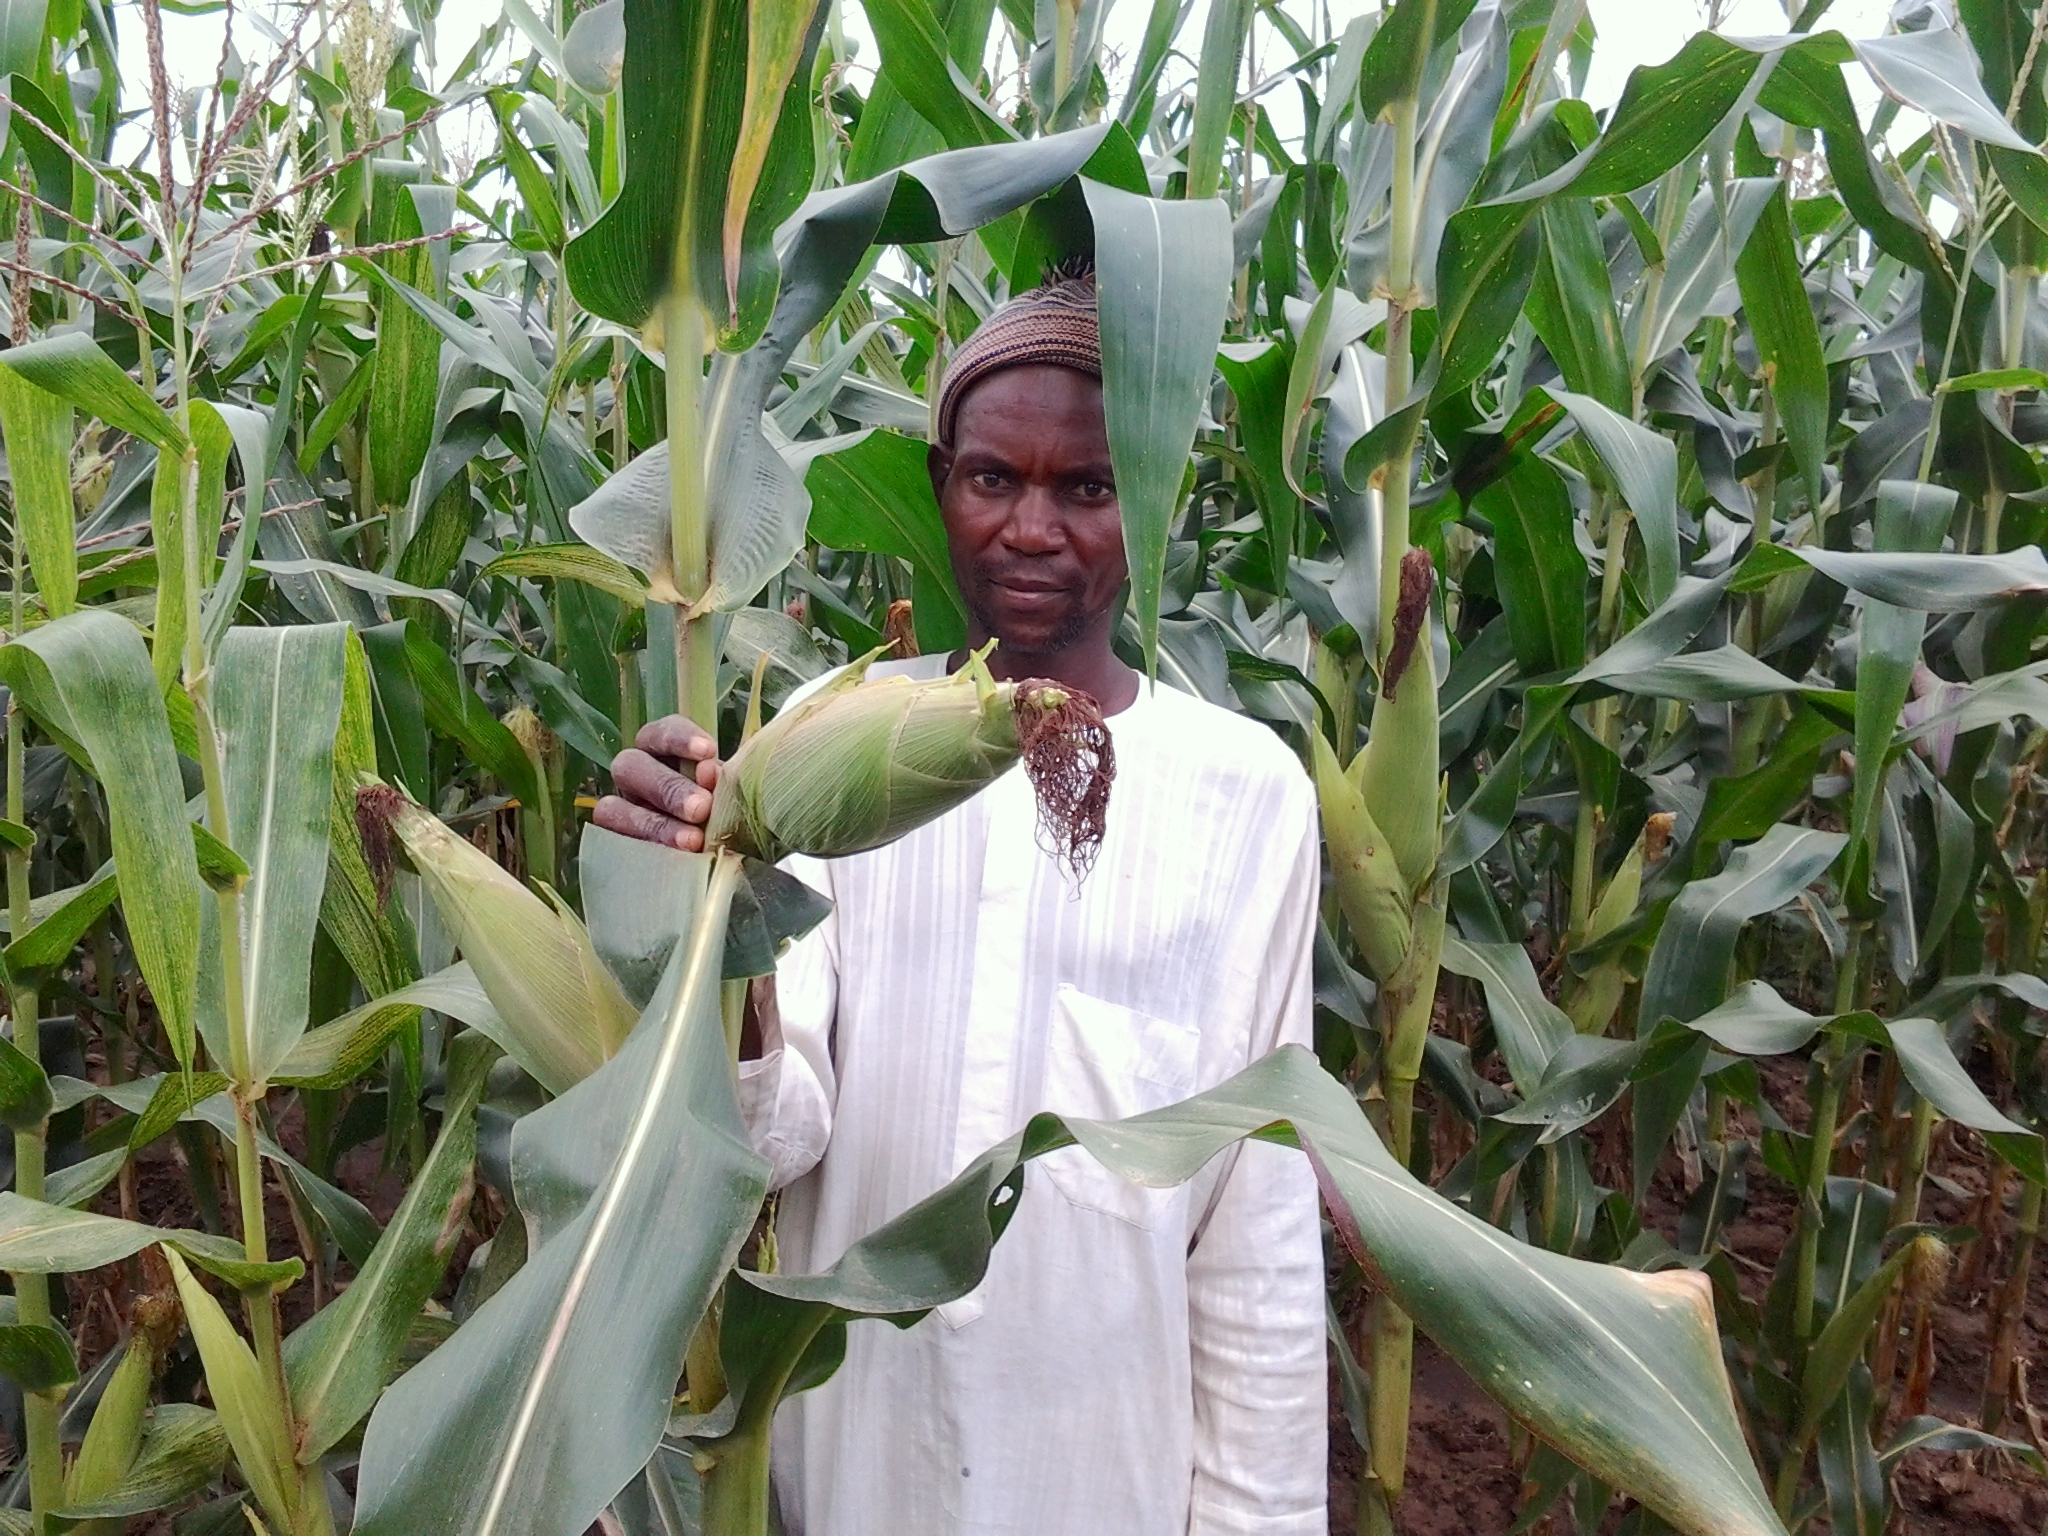 A farmer shows maize growing in his field, in one of the communities in northern Nigeria which participated in the study. (Photo: Oyakhilomen Oyinbo)